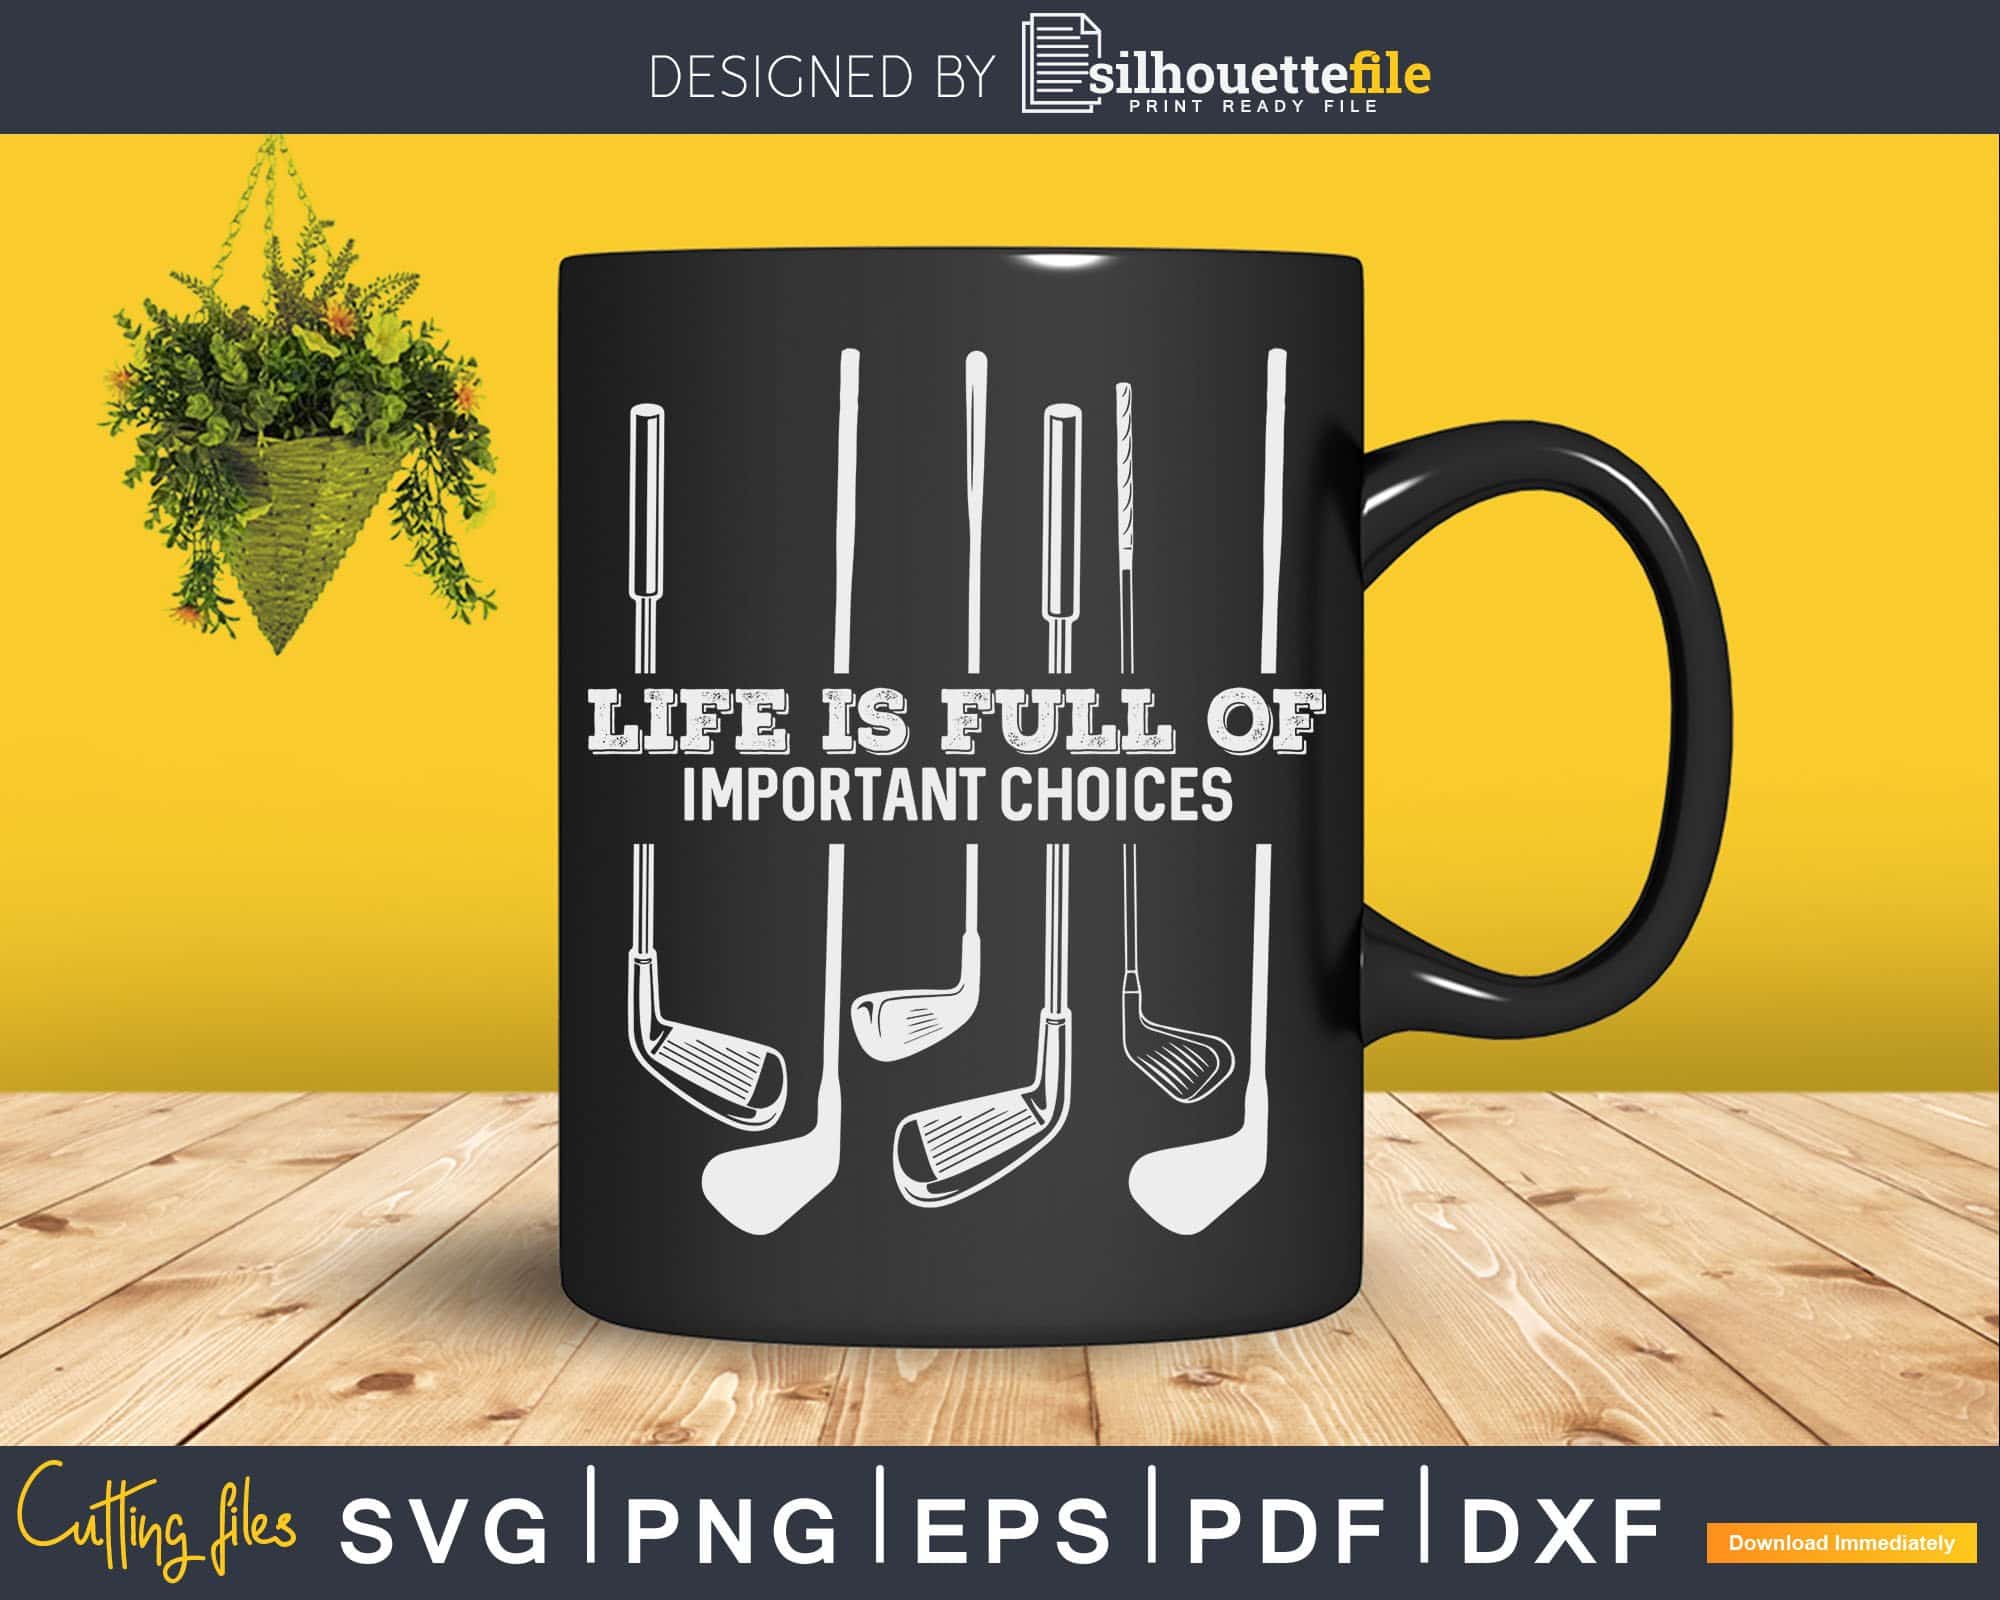 https://cdn.shopify.com/s/files/1/0356/6554/3307/products/funny-life-is-full-of-important-choices-golf-lover-svg-cut-files-silhouettefile-433.jpg